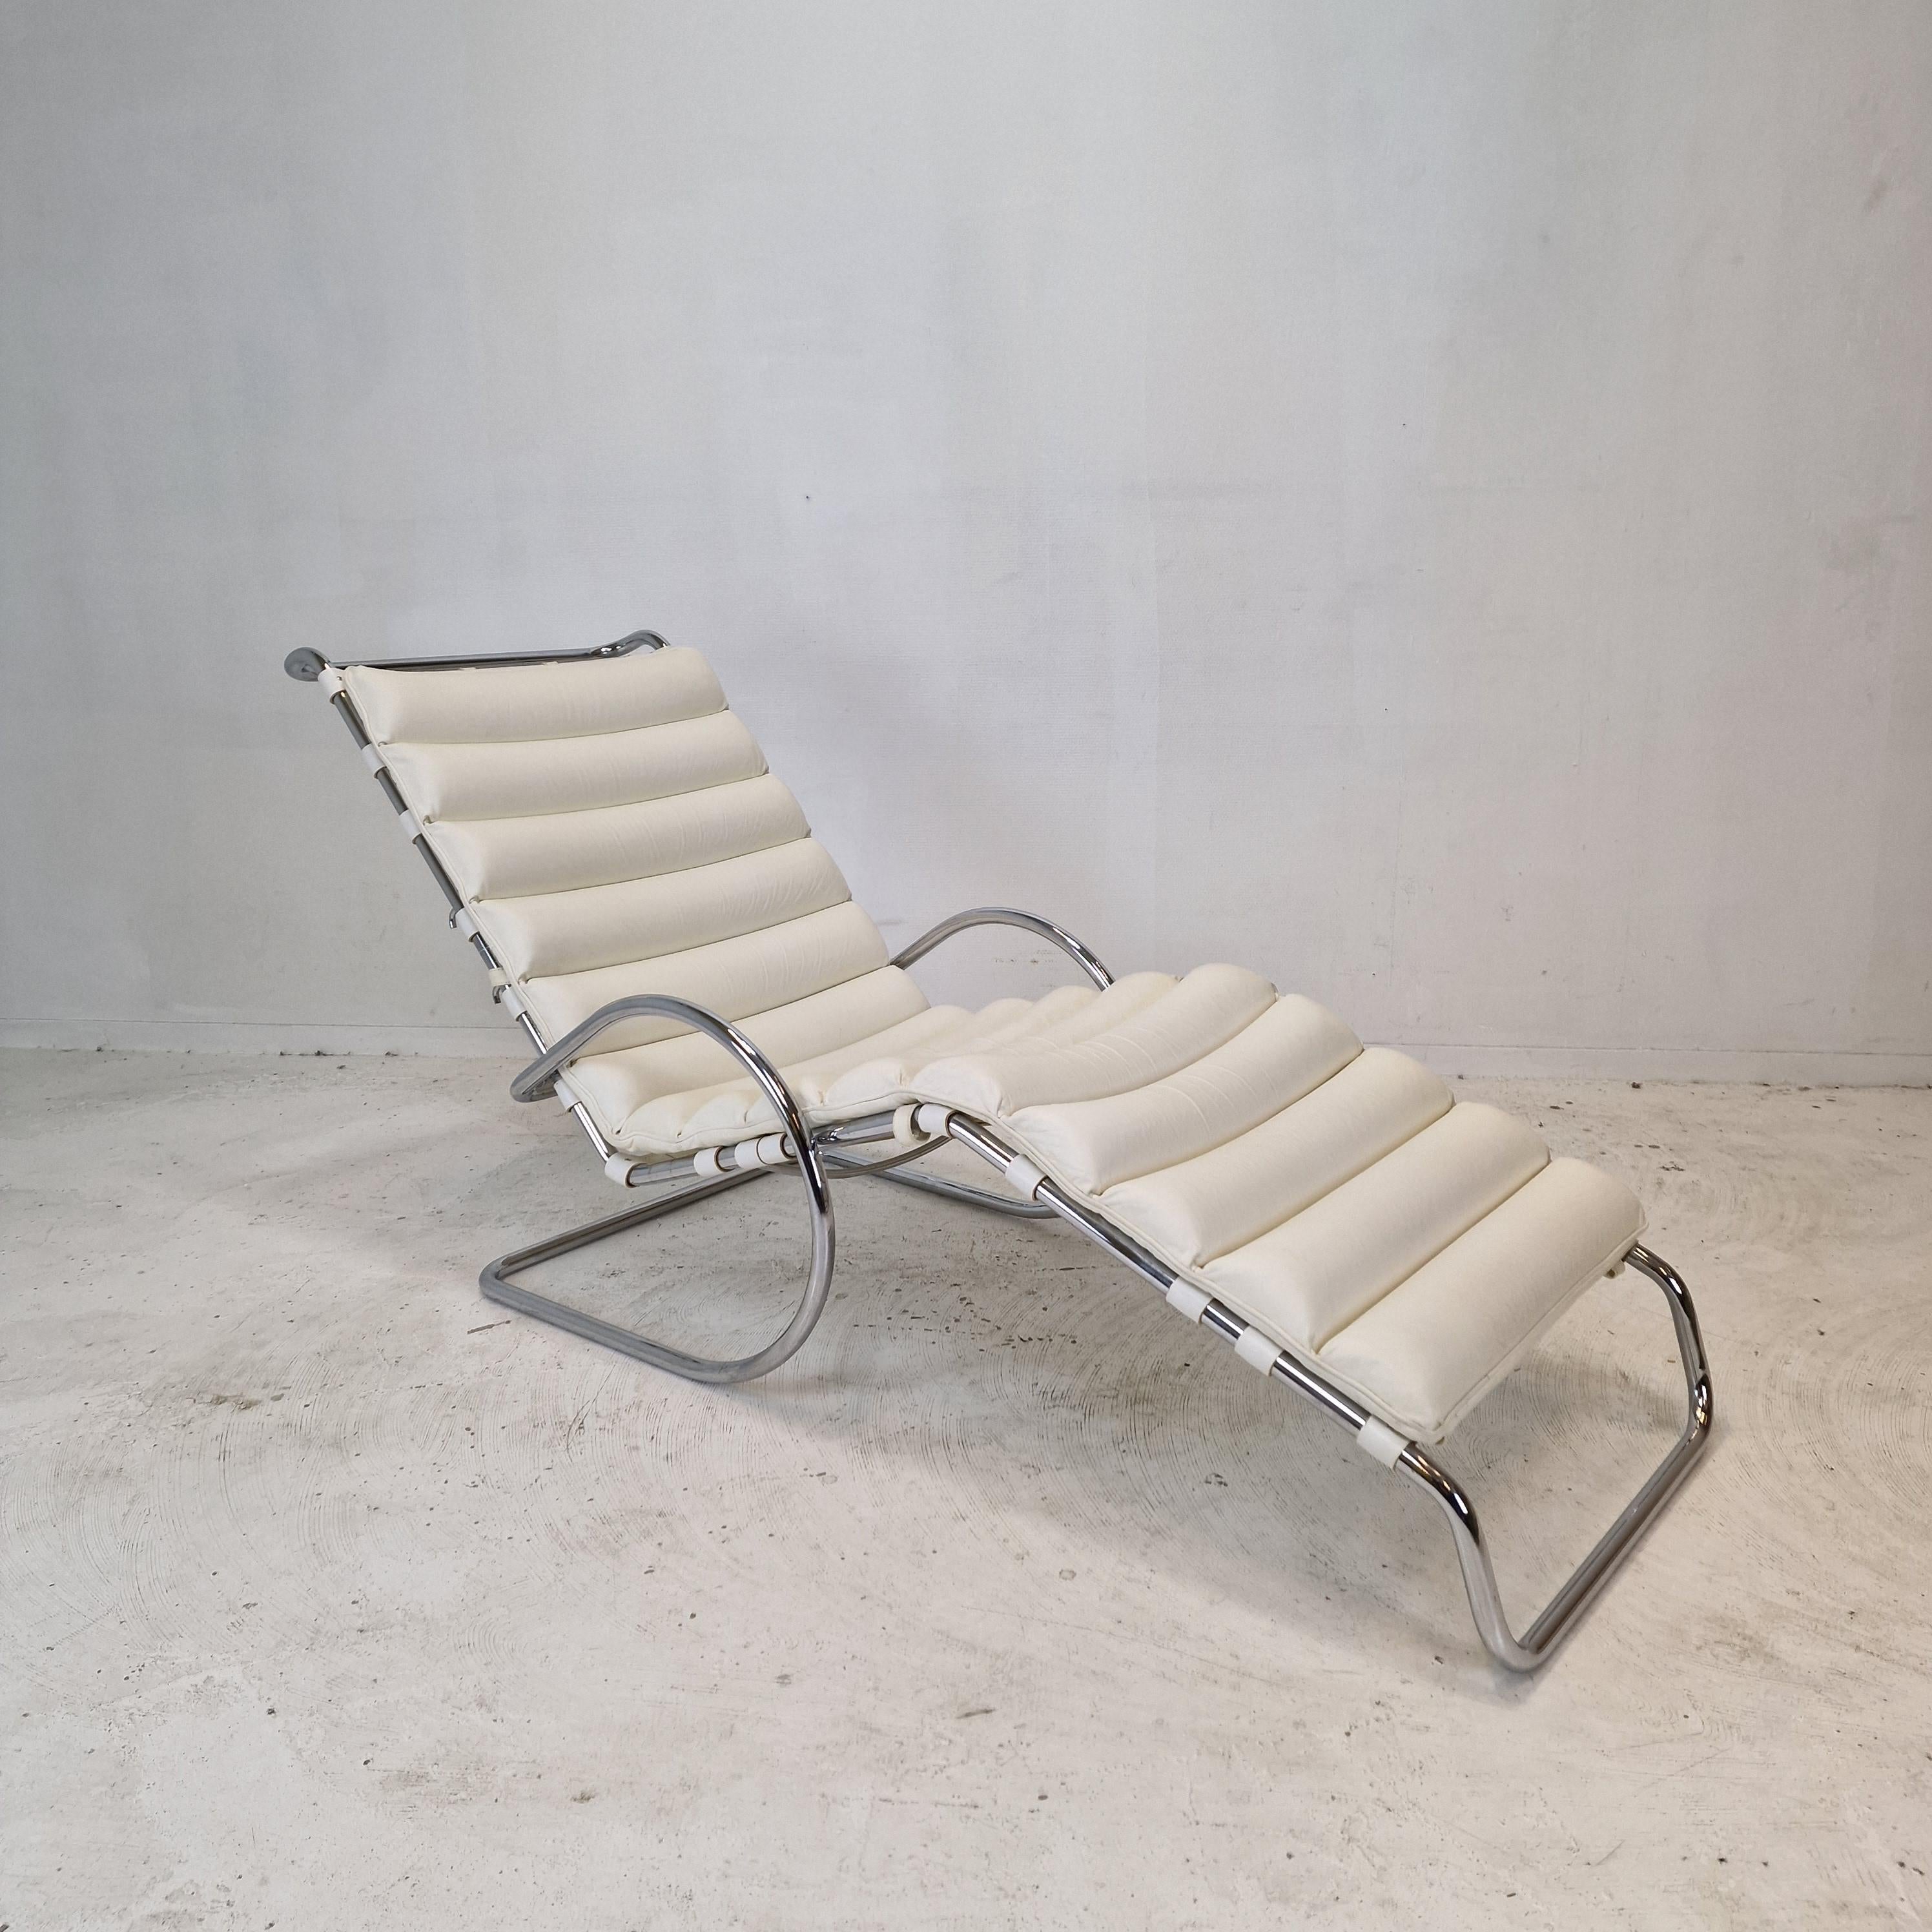 The adjustable Model 242 MR Chaise Lounge was designed by Ludwig Mies van der Rohe in 1927. 
This particular example was produced in 1980 by Knoll International in the USA. 

The chaise features a high quality white leather channel-upholstered